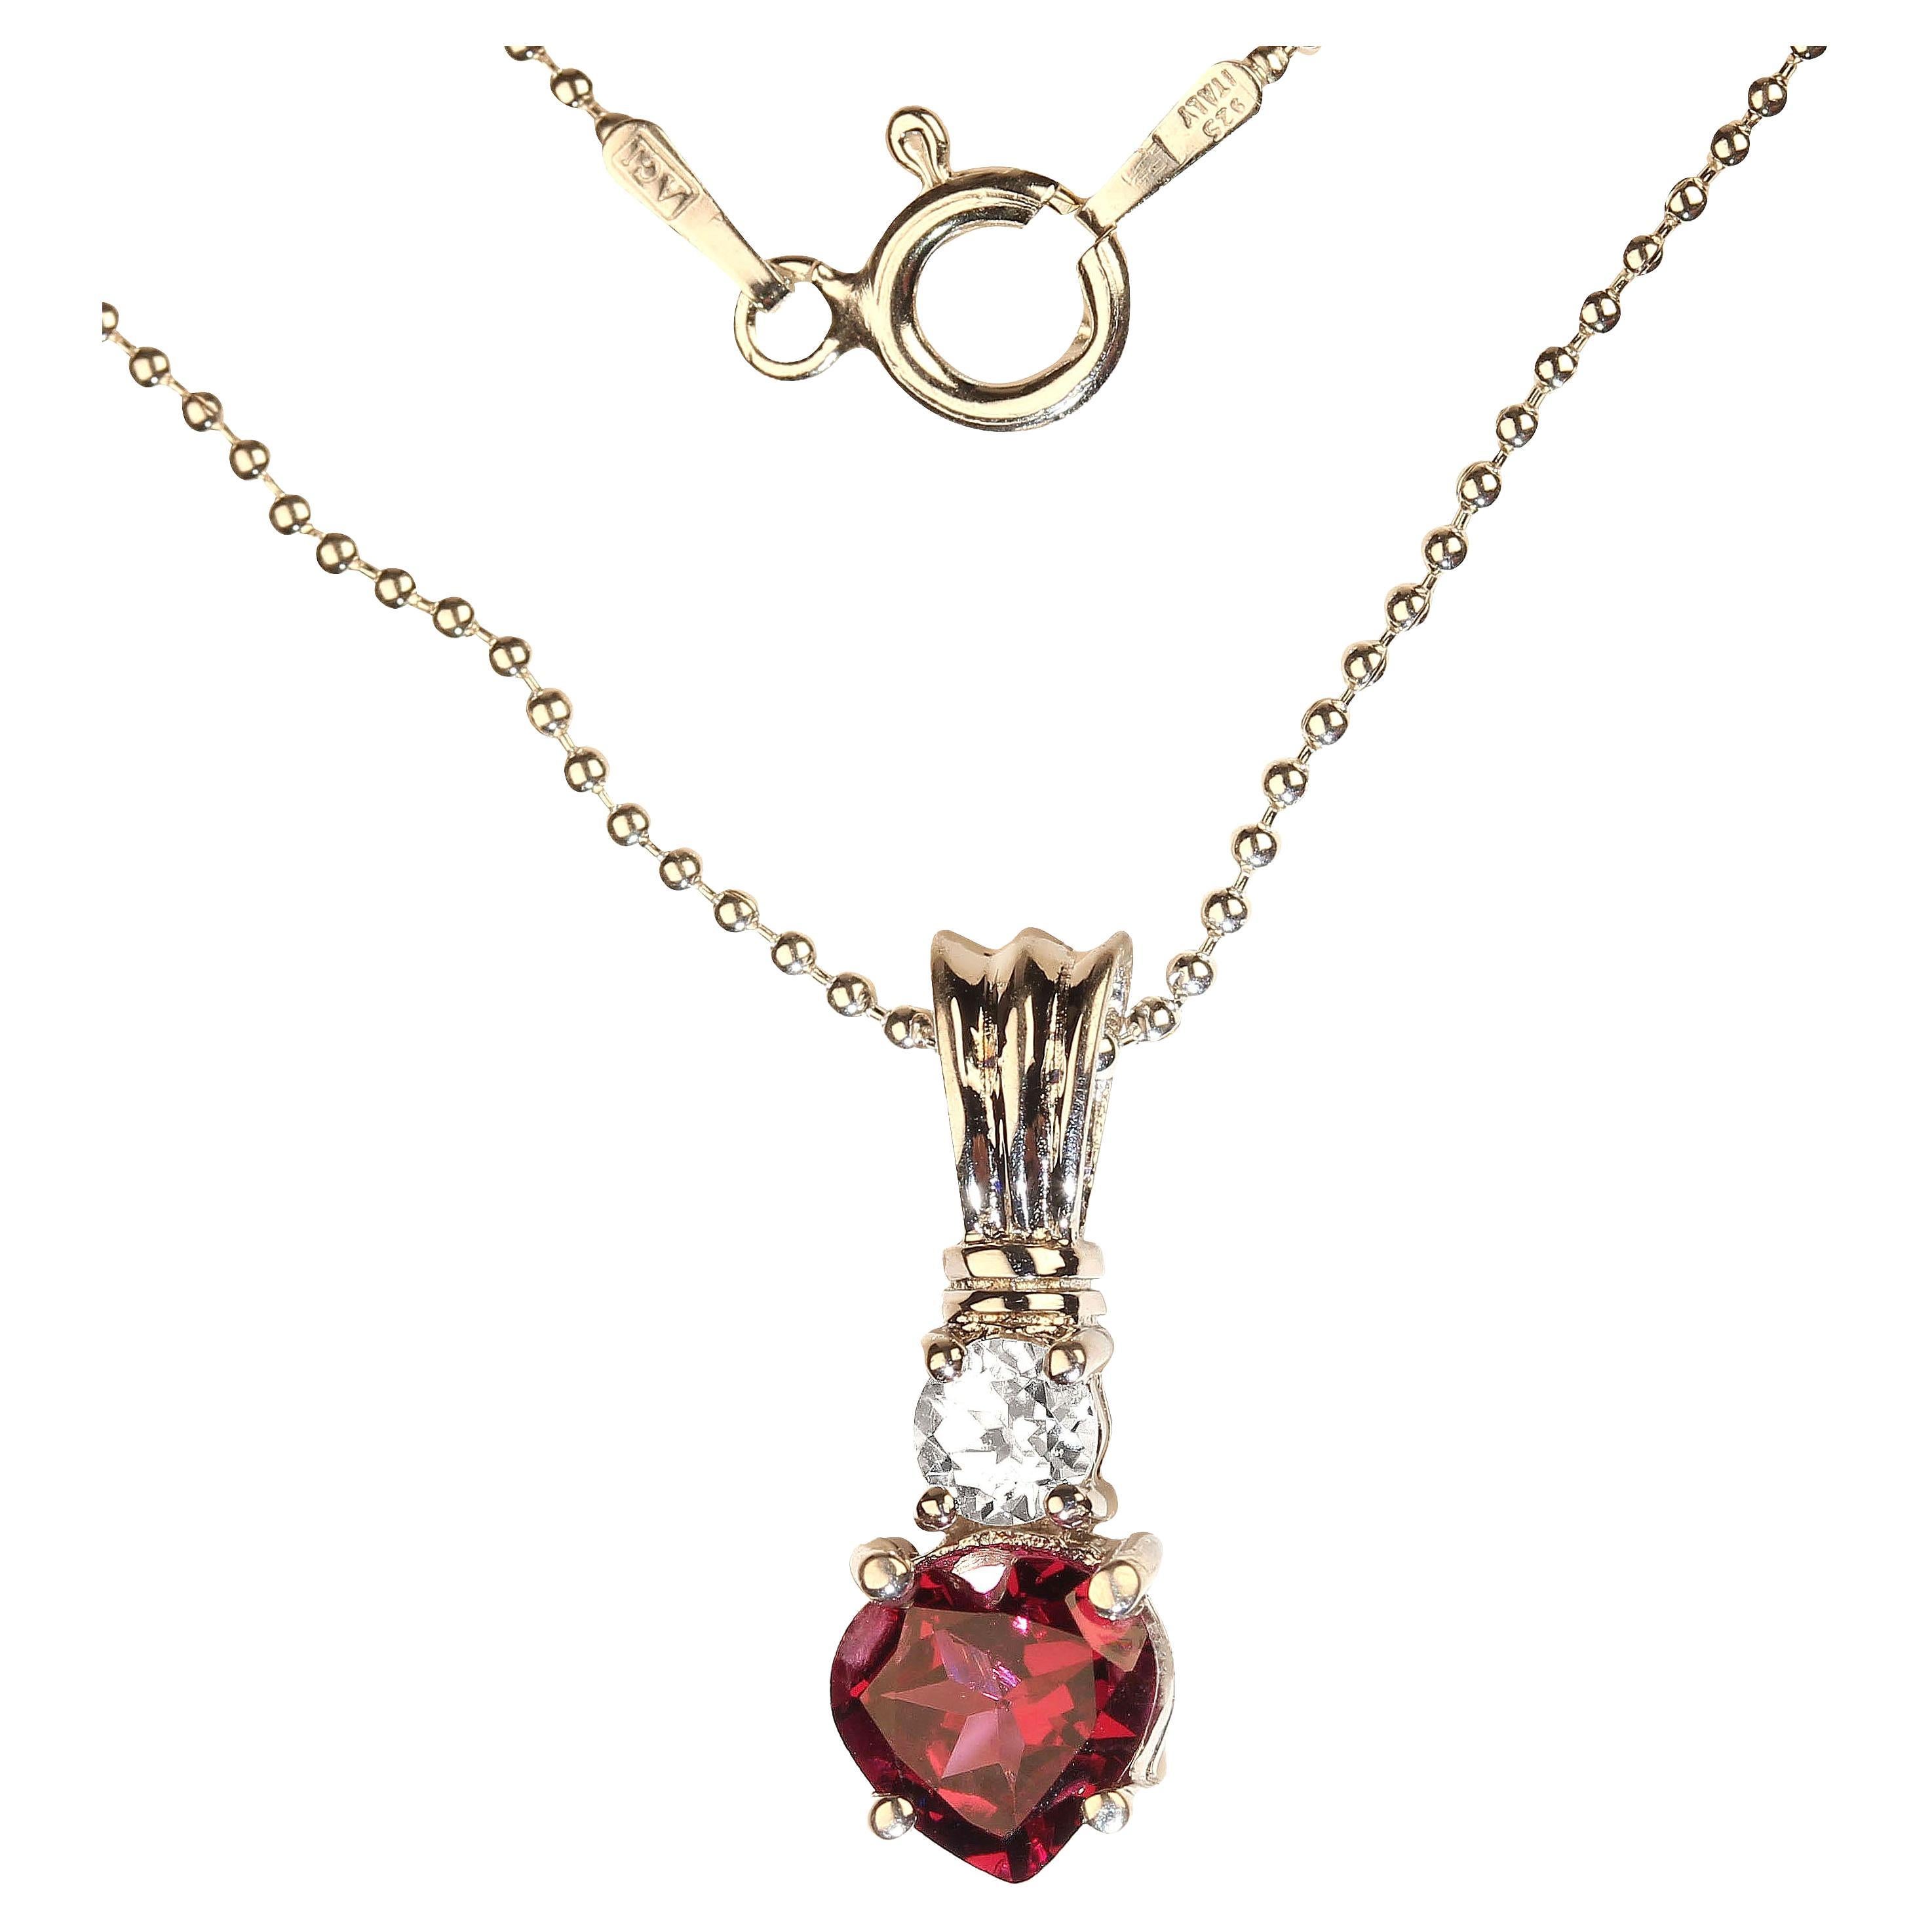 AJD  Garnet and Genuine Zircon Sterling Pendant    Great Gift For Sale